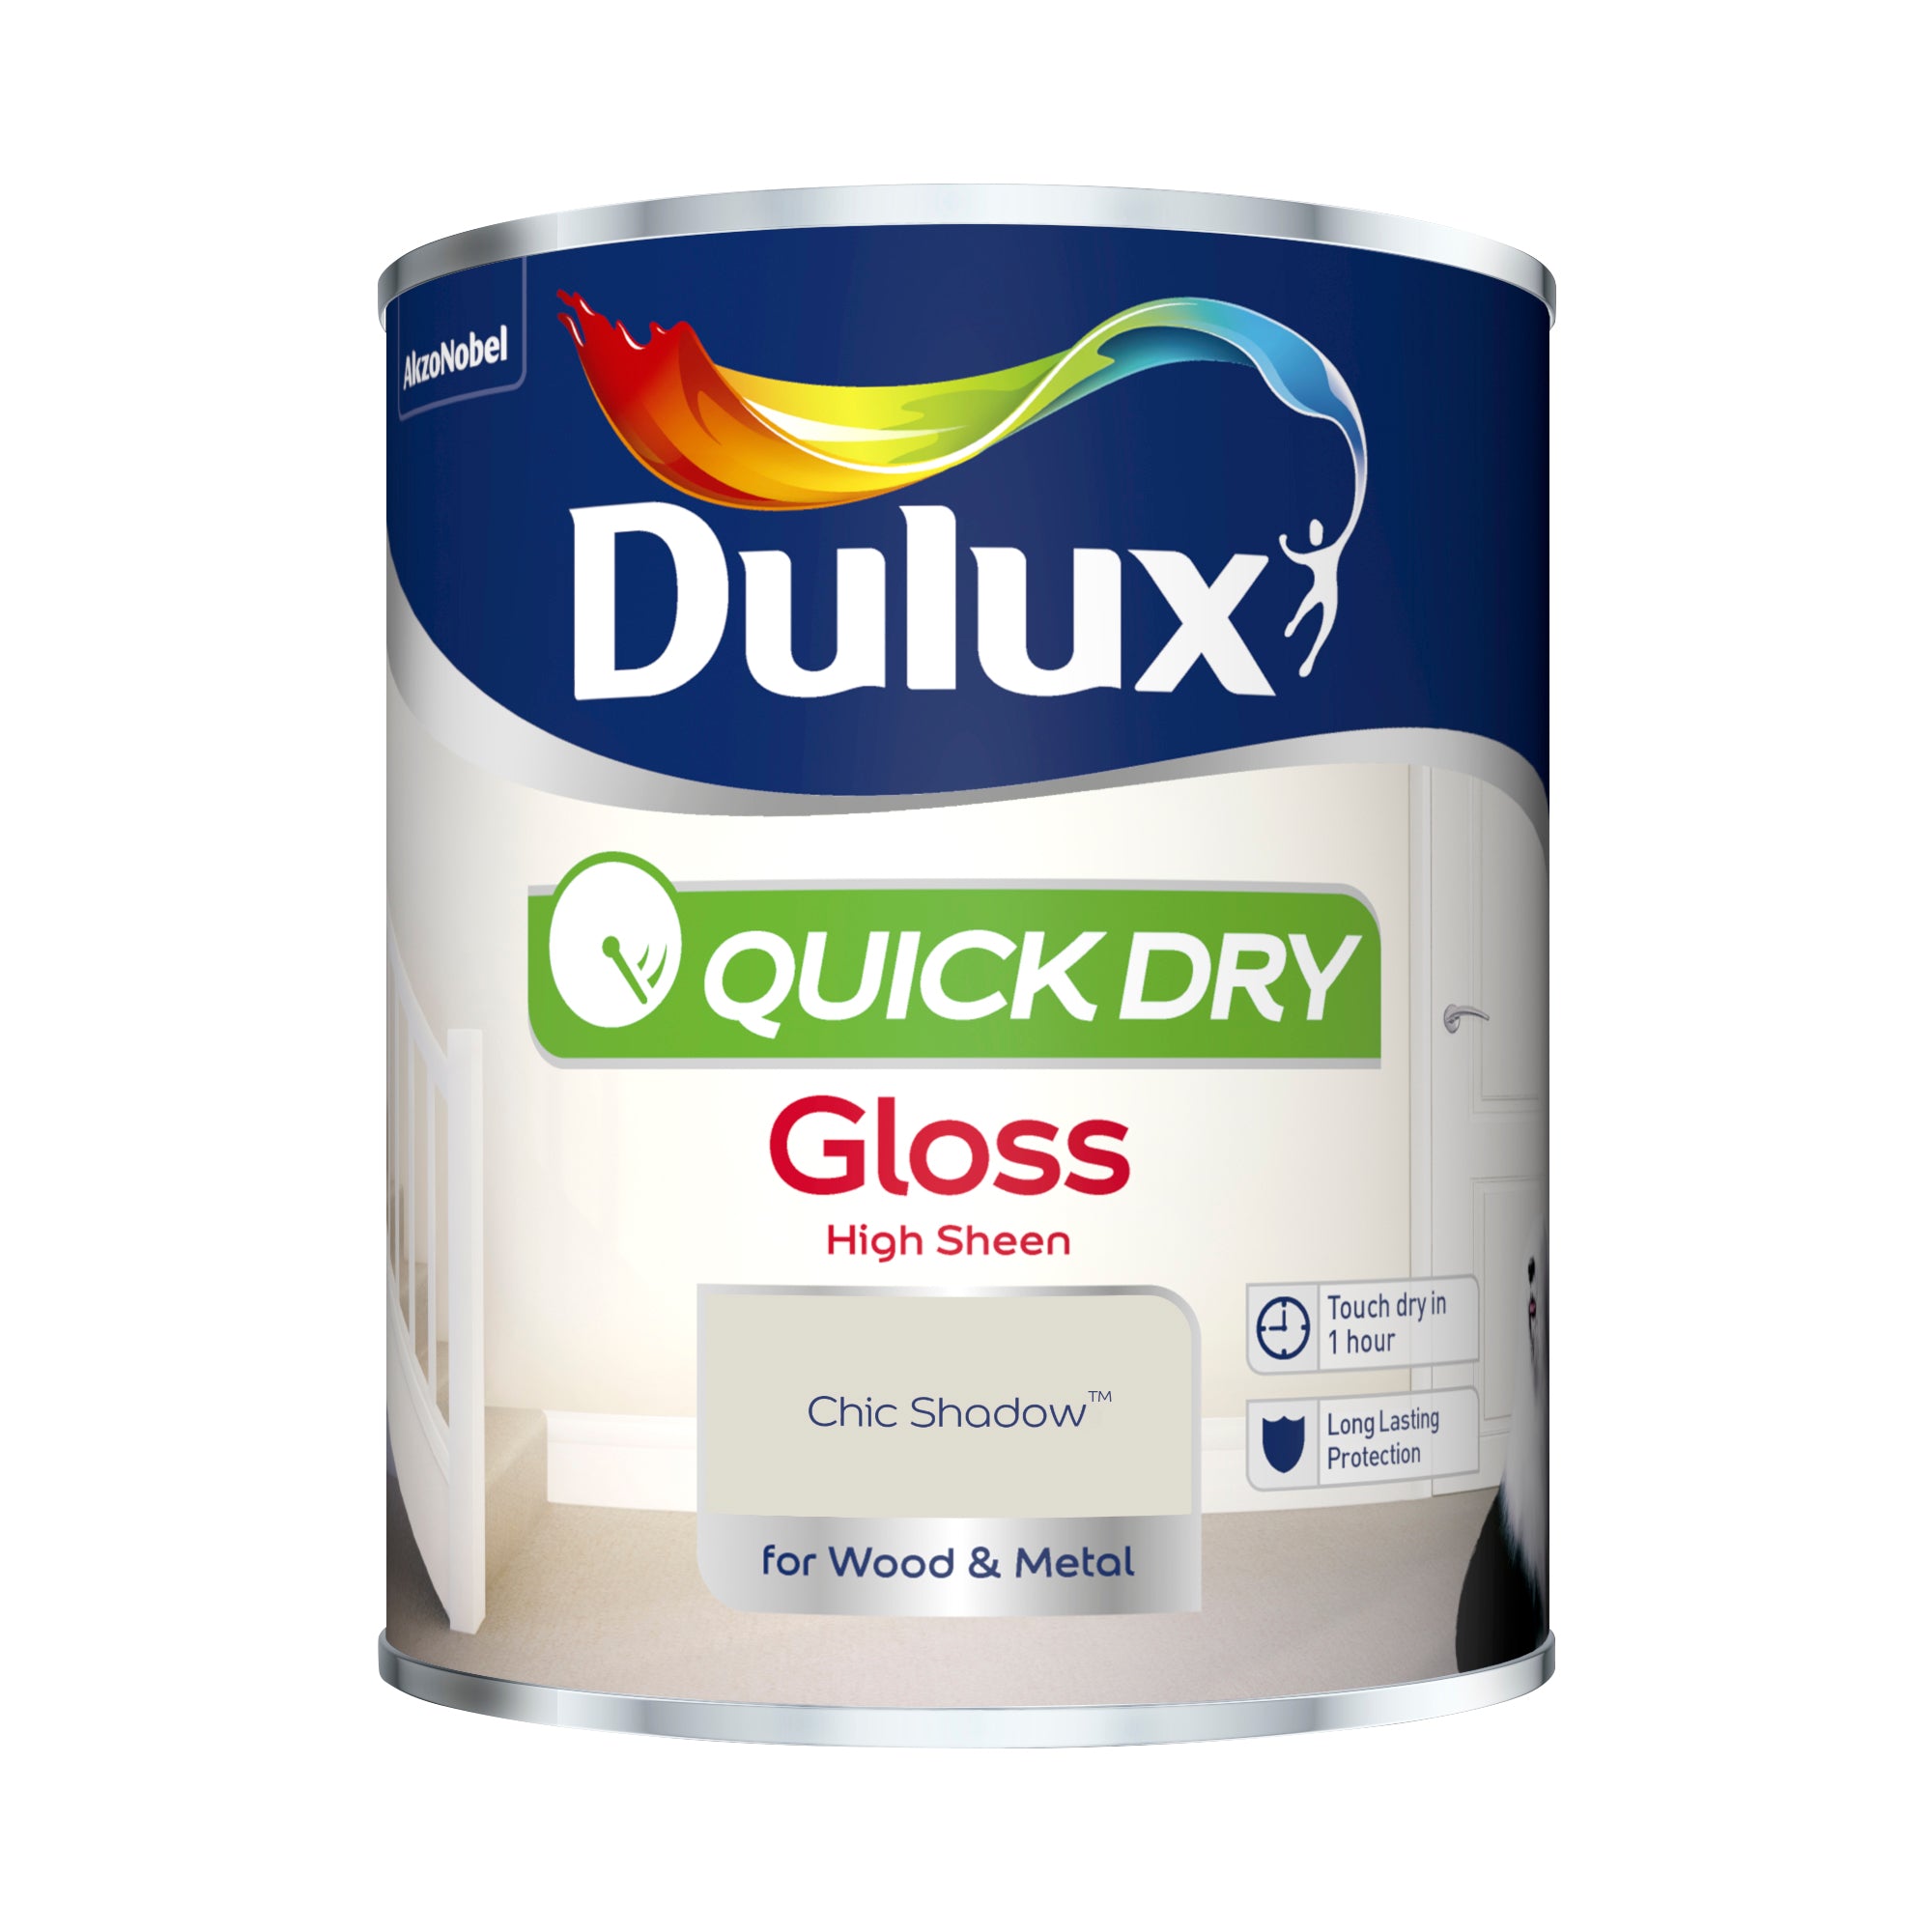 Dulux Quick Dry Gloss Chic Shadow 750ml